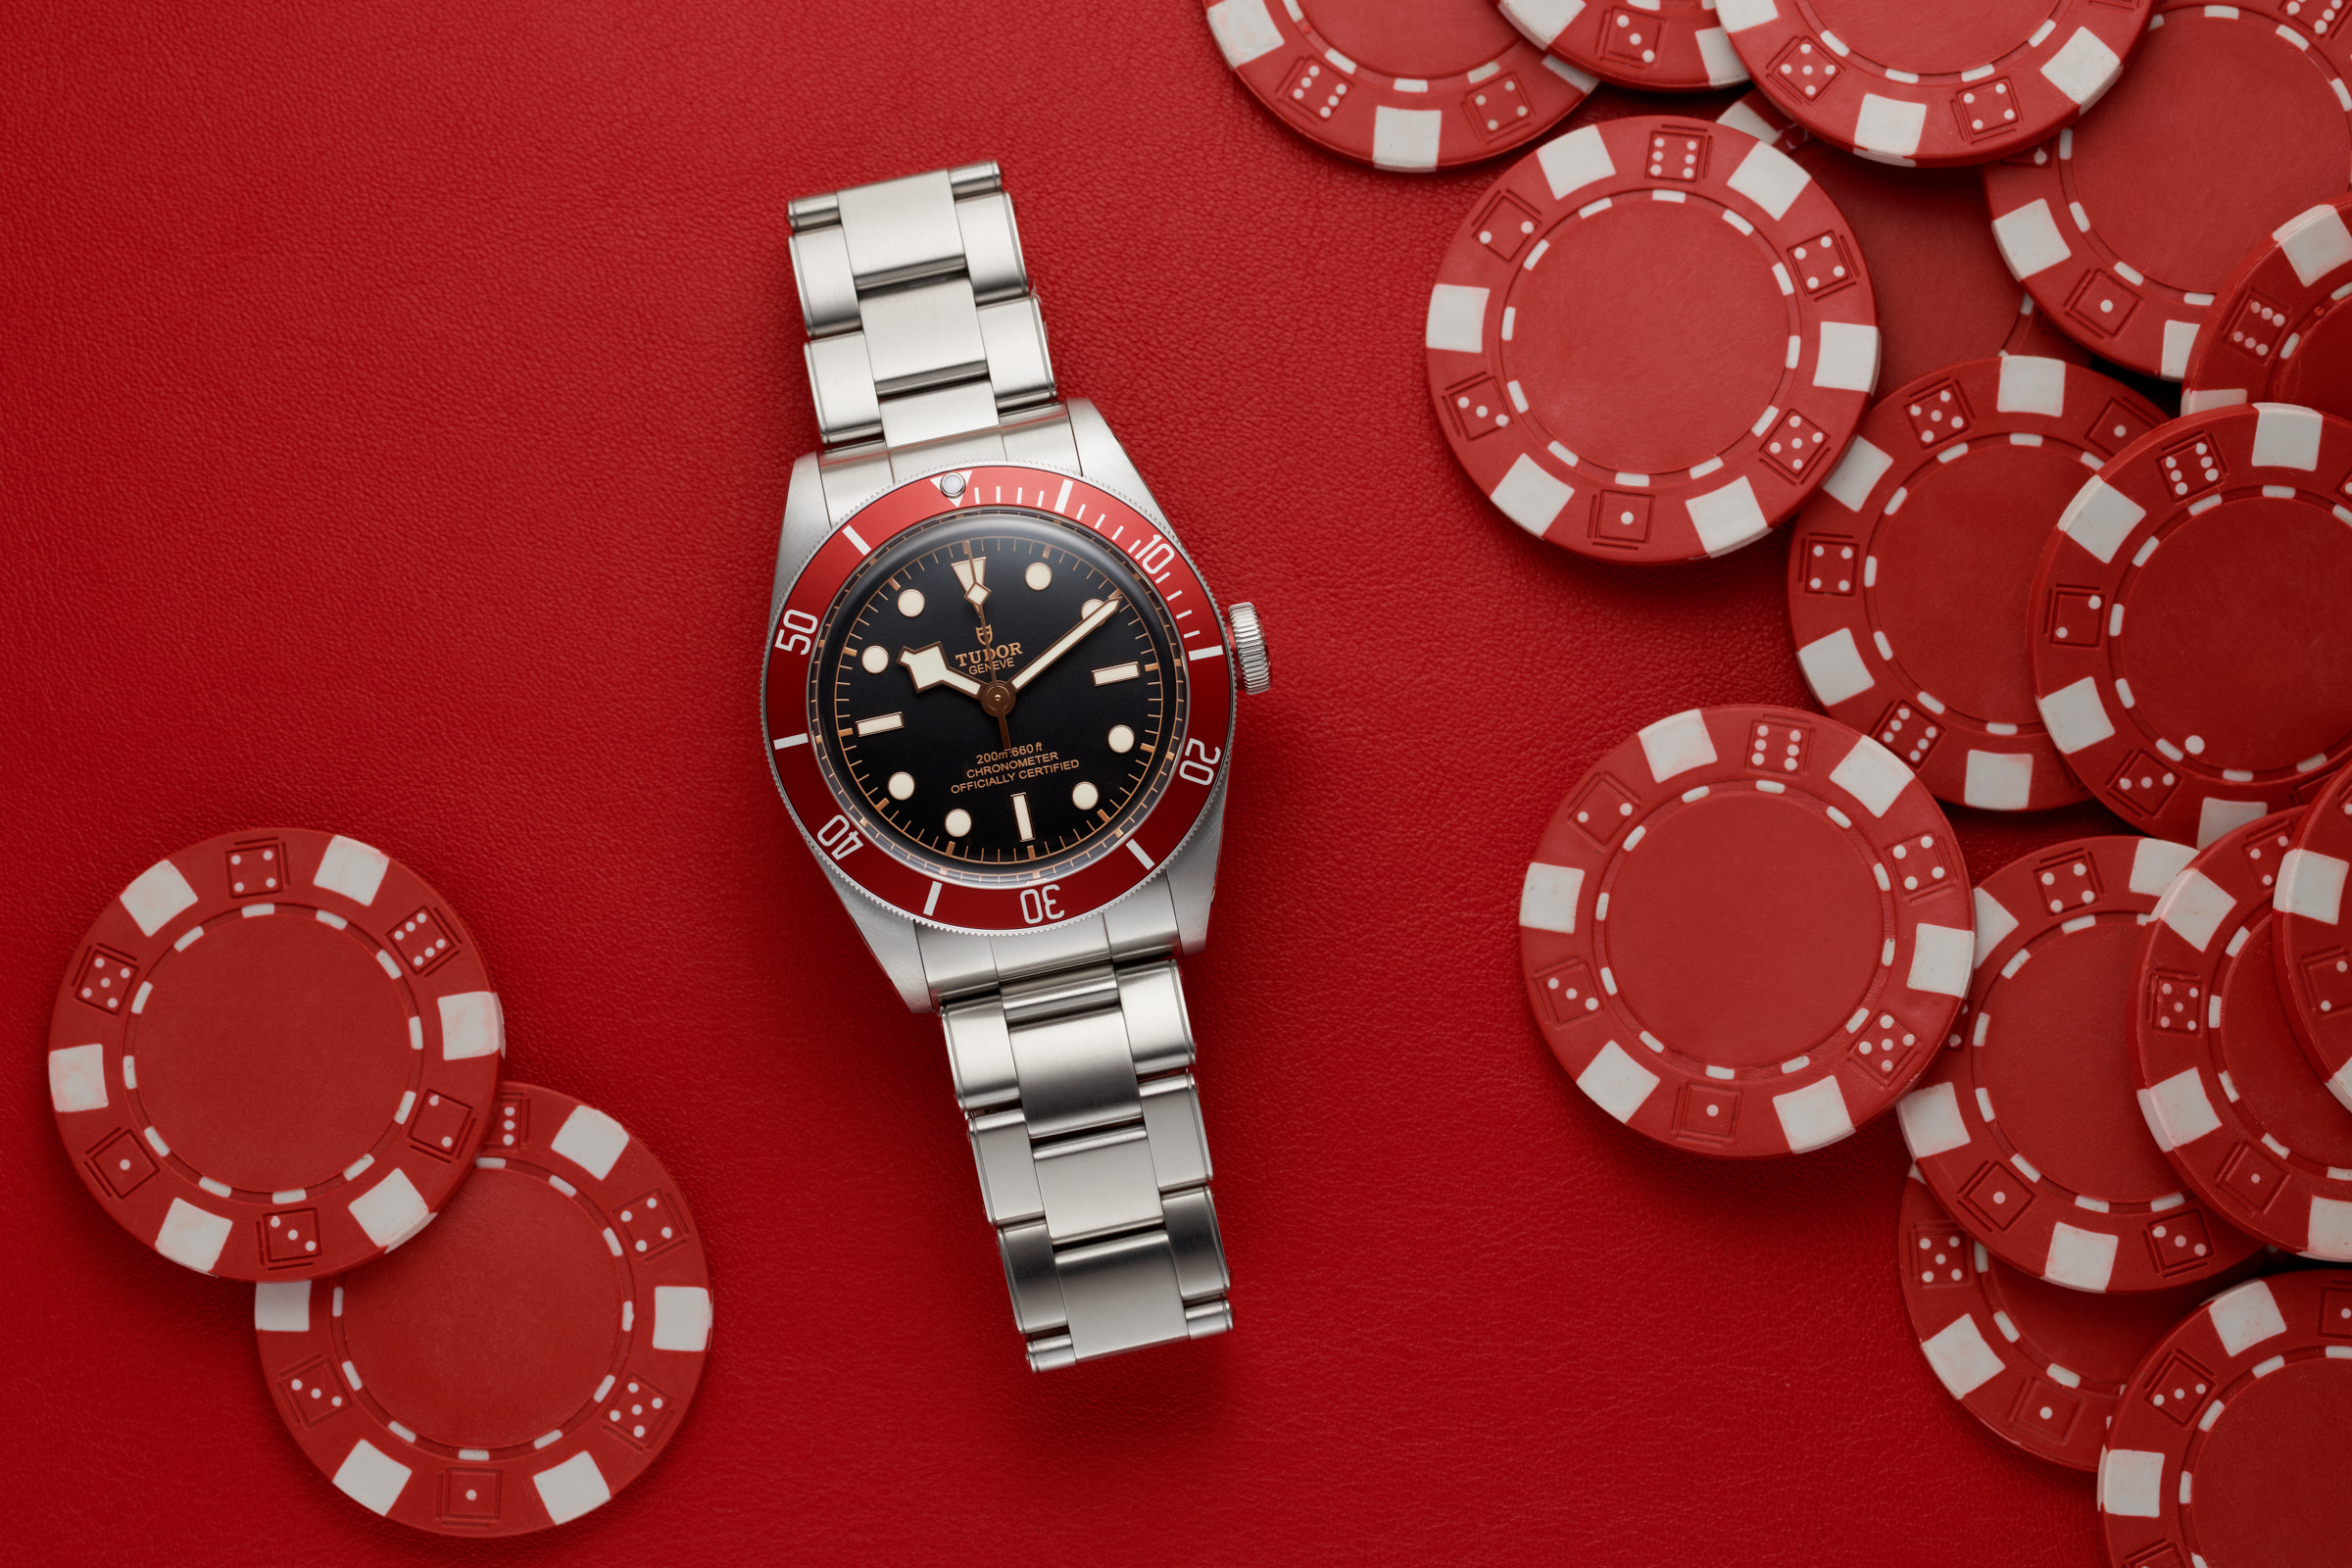 Tudor Black Bay 79230R surrounded by red poker chips on a red leather background.